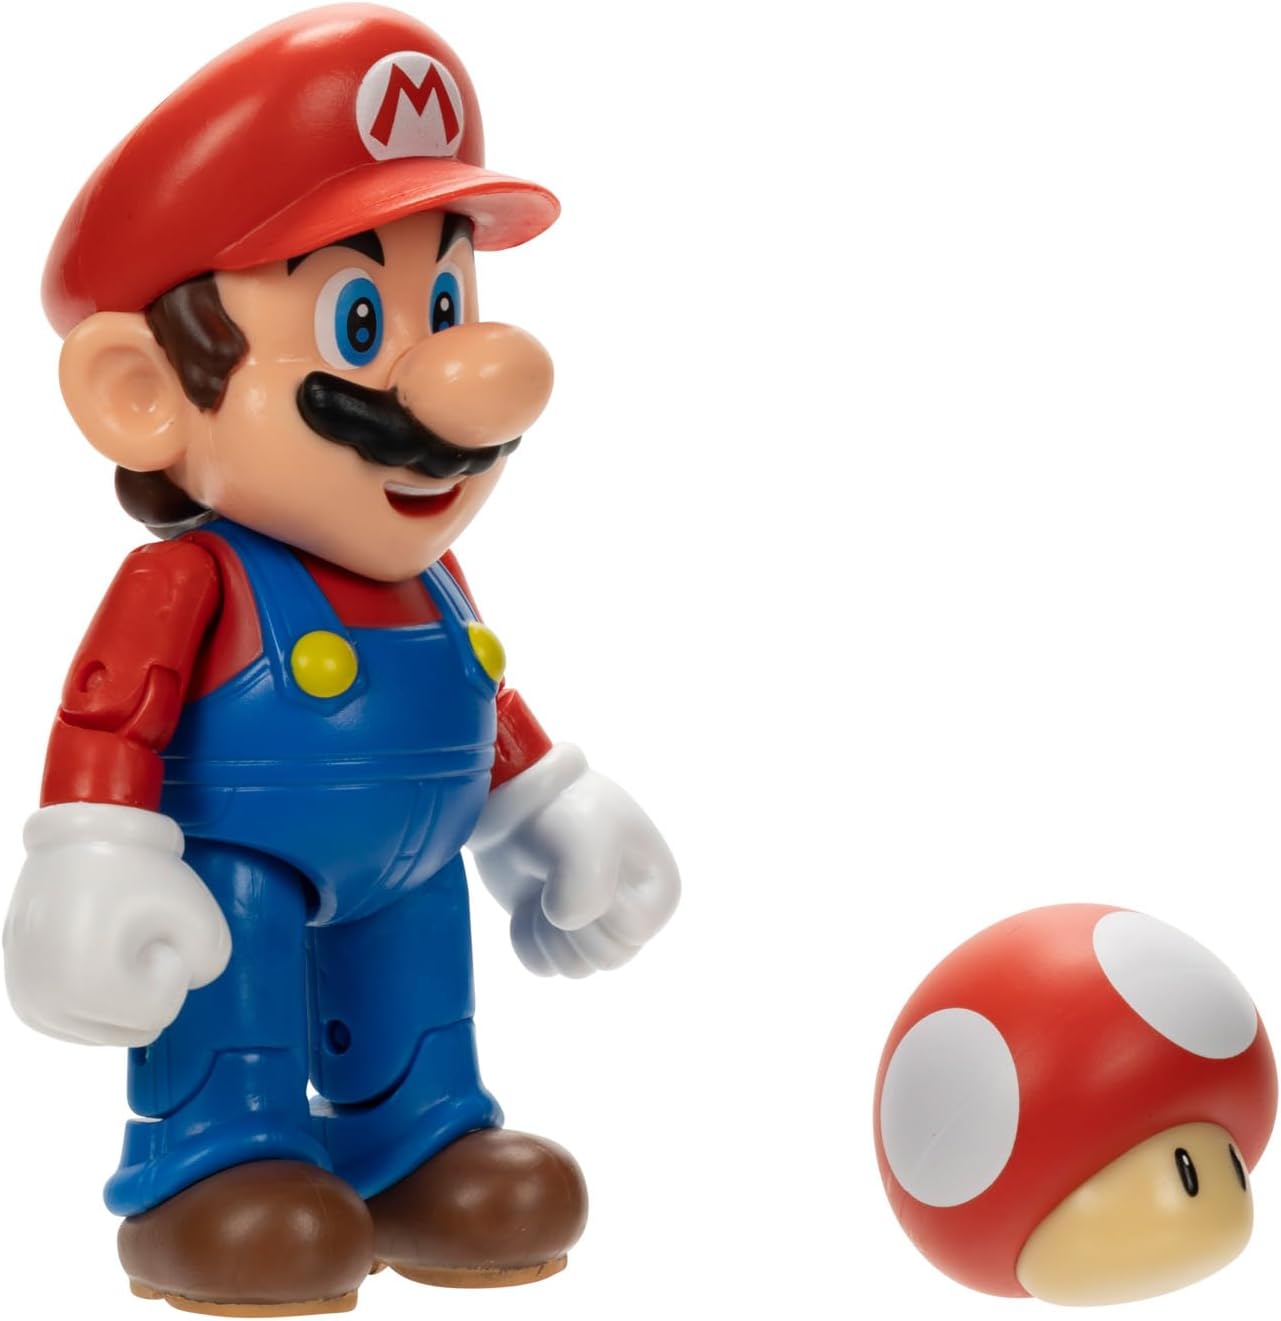 Super Mario Nintendo 4-Inch Mario Poseable Figure with Power up Mushroom Accessory. Ages 3+